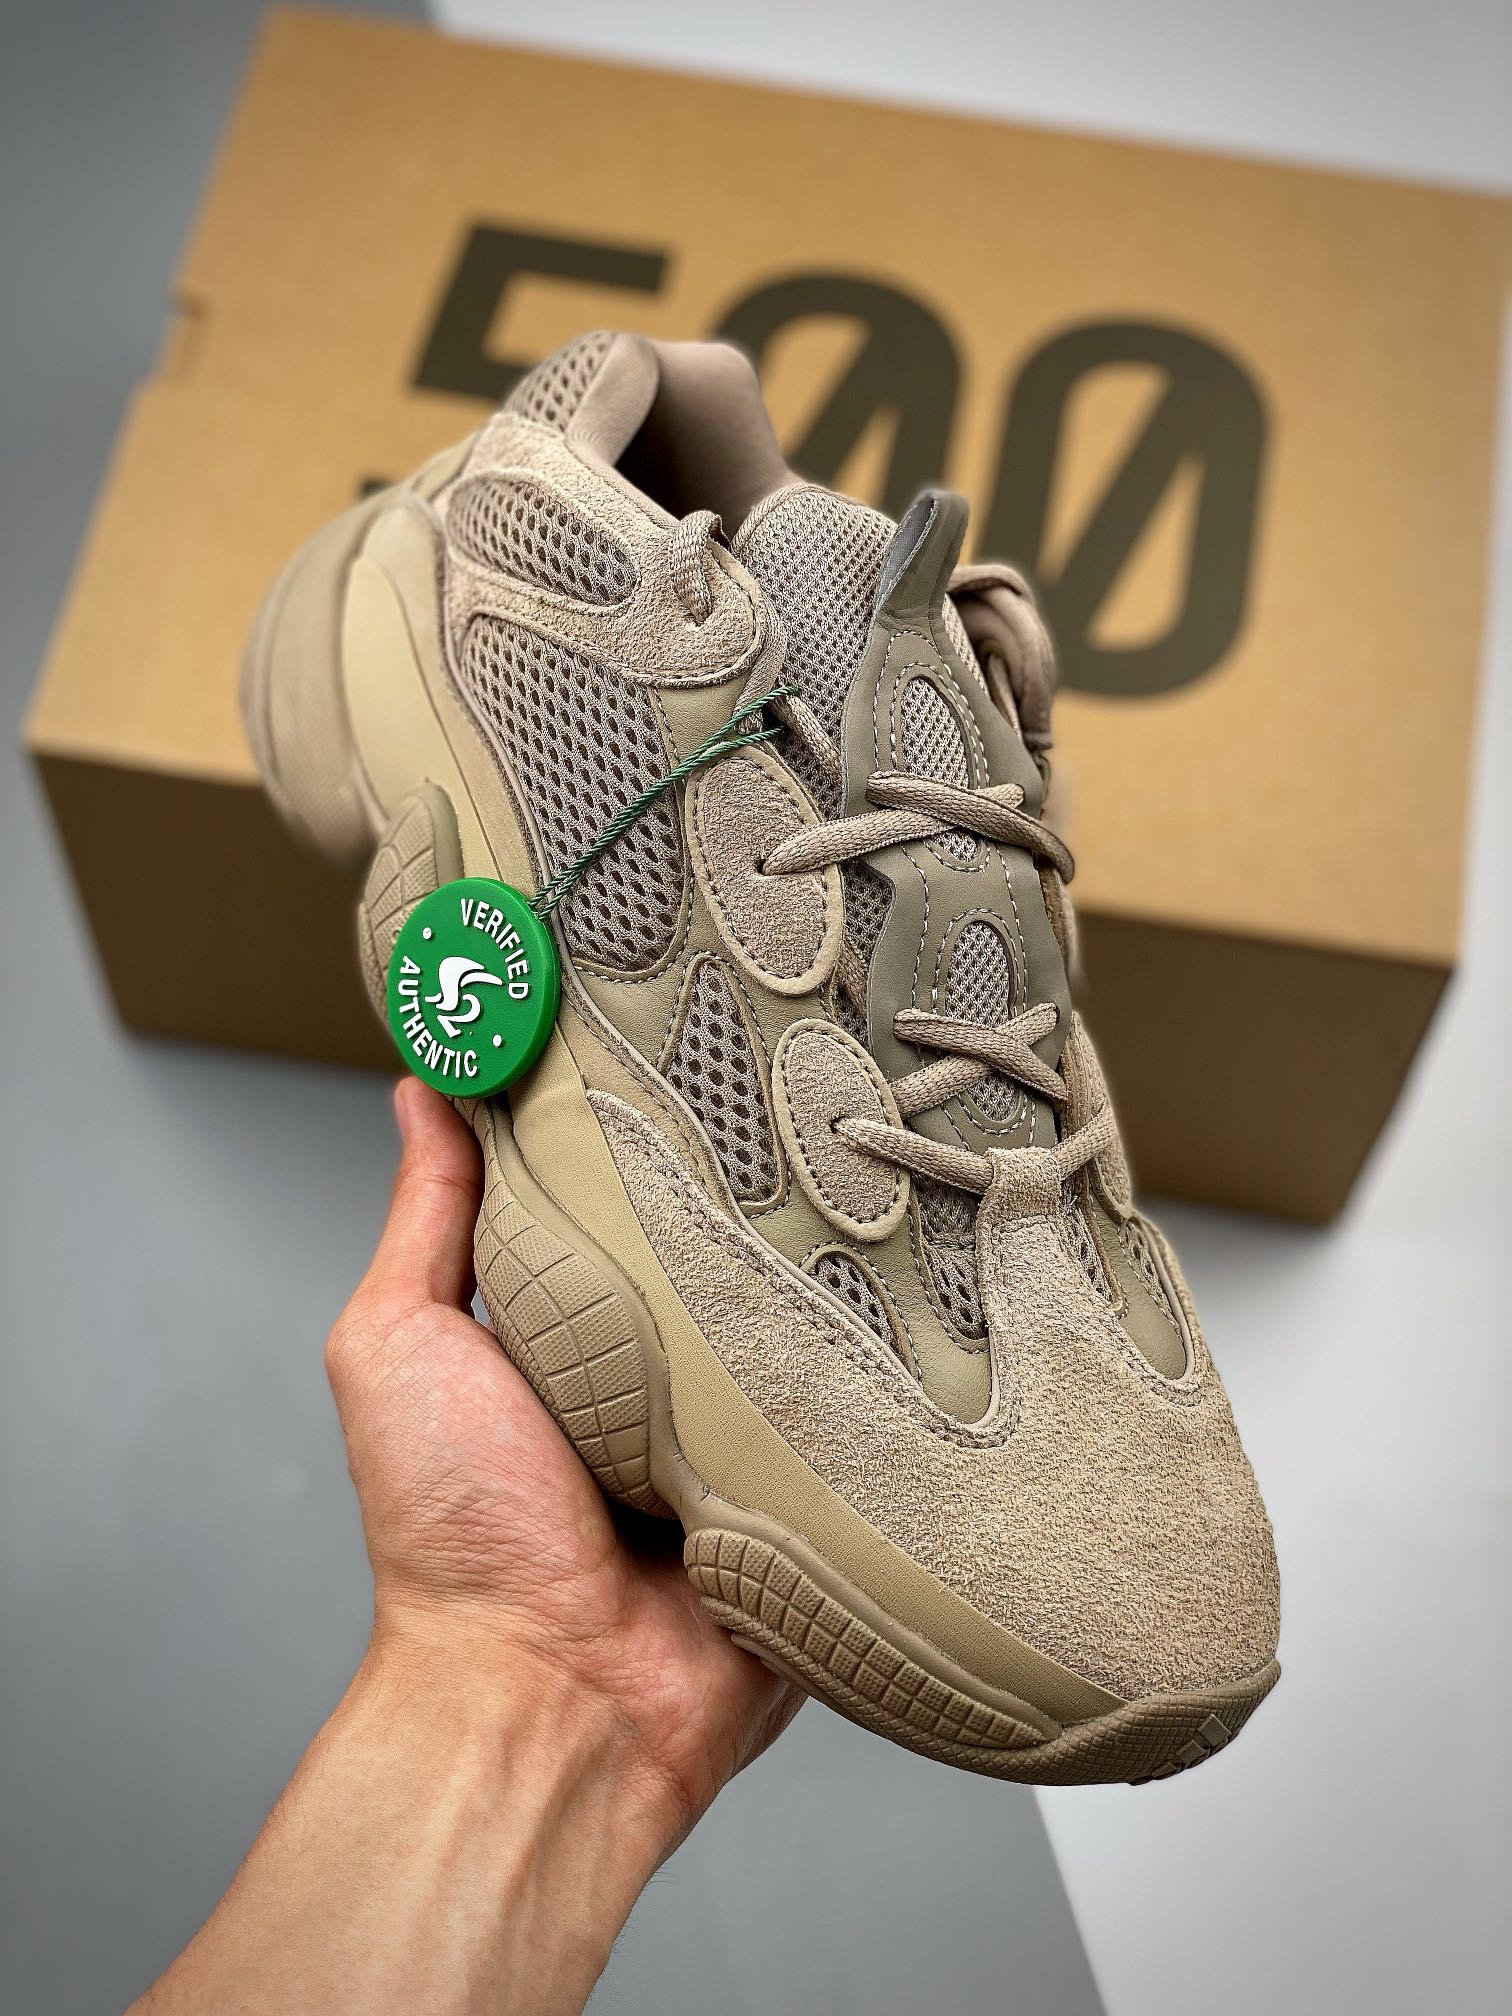 adidas Yeezy 500 “Taupe Light” GX3605 For Sale – Sneaker Hello